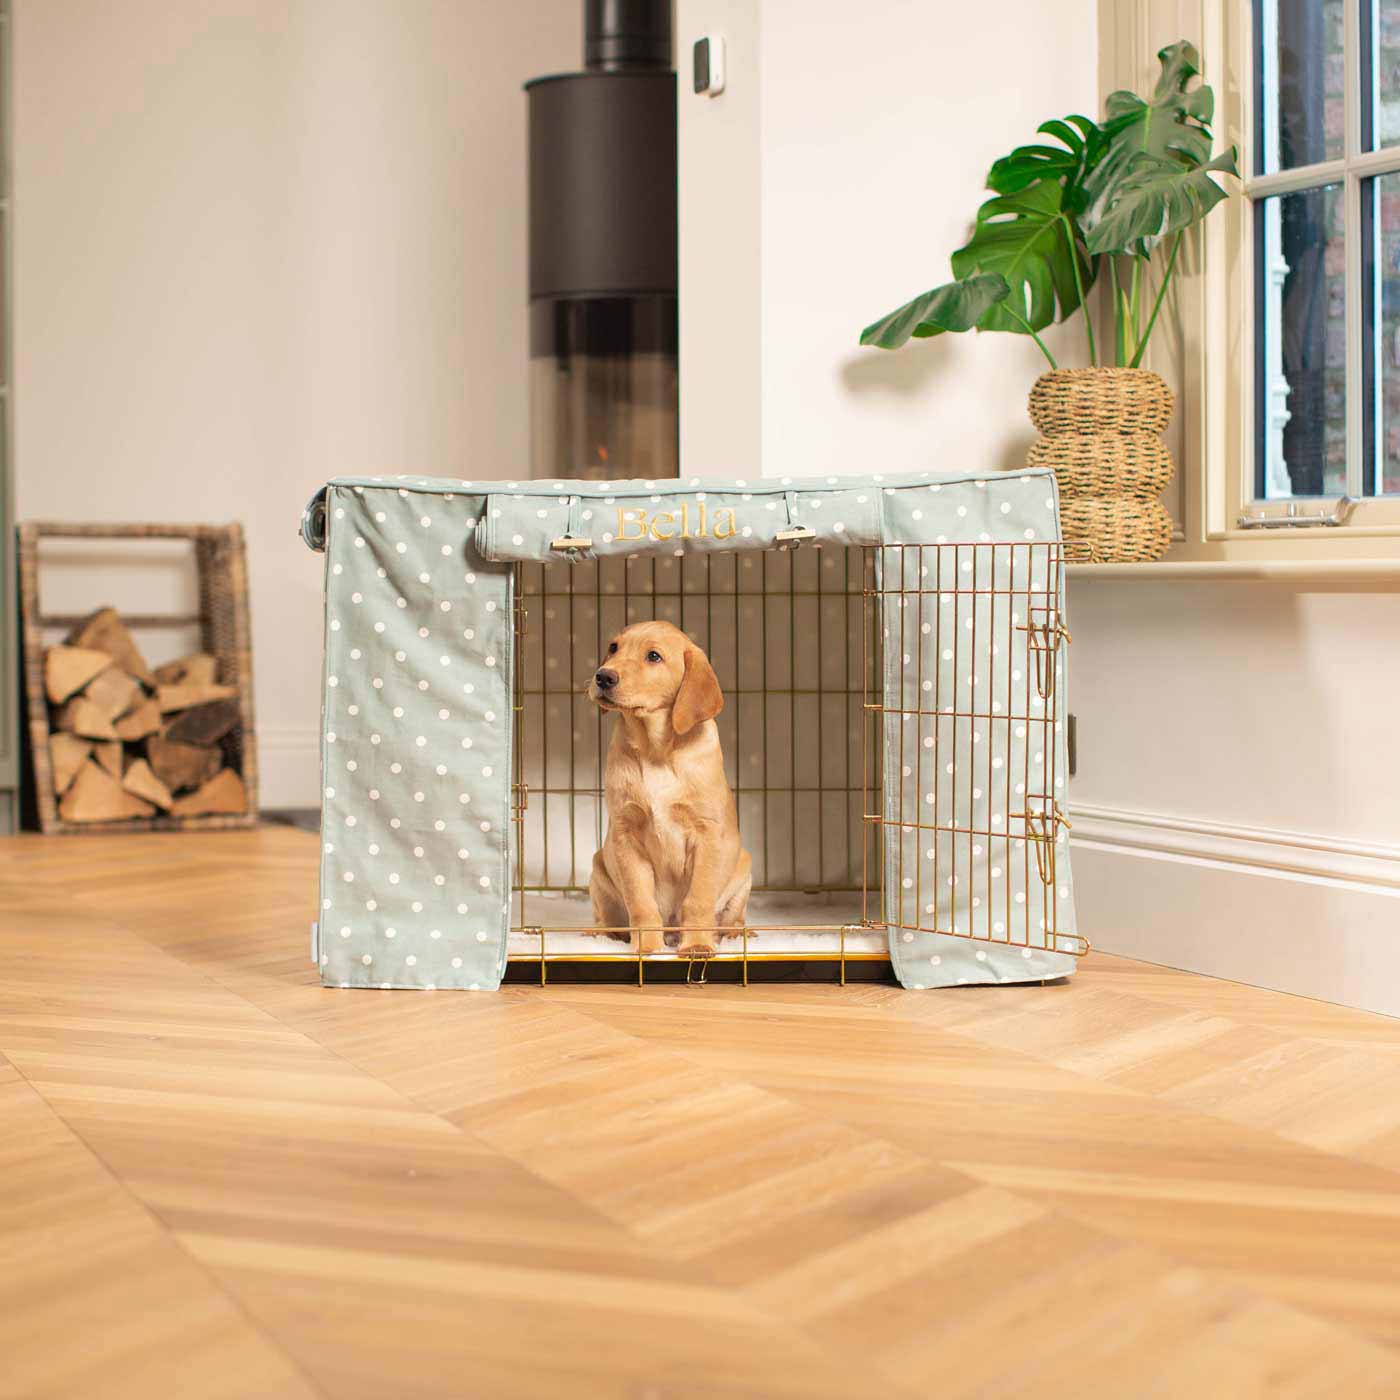 Luxury Gold Dog Cage With Cage Cover, in Duck Egg Spot. The Perfect Dog Crate For The Ultimate Naptime, Available Now to Personalize at Lords & Labradors US